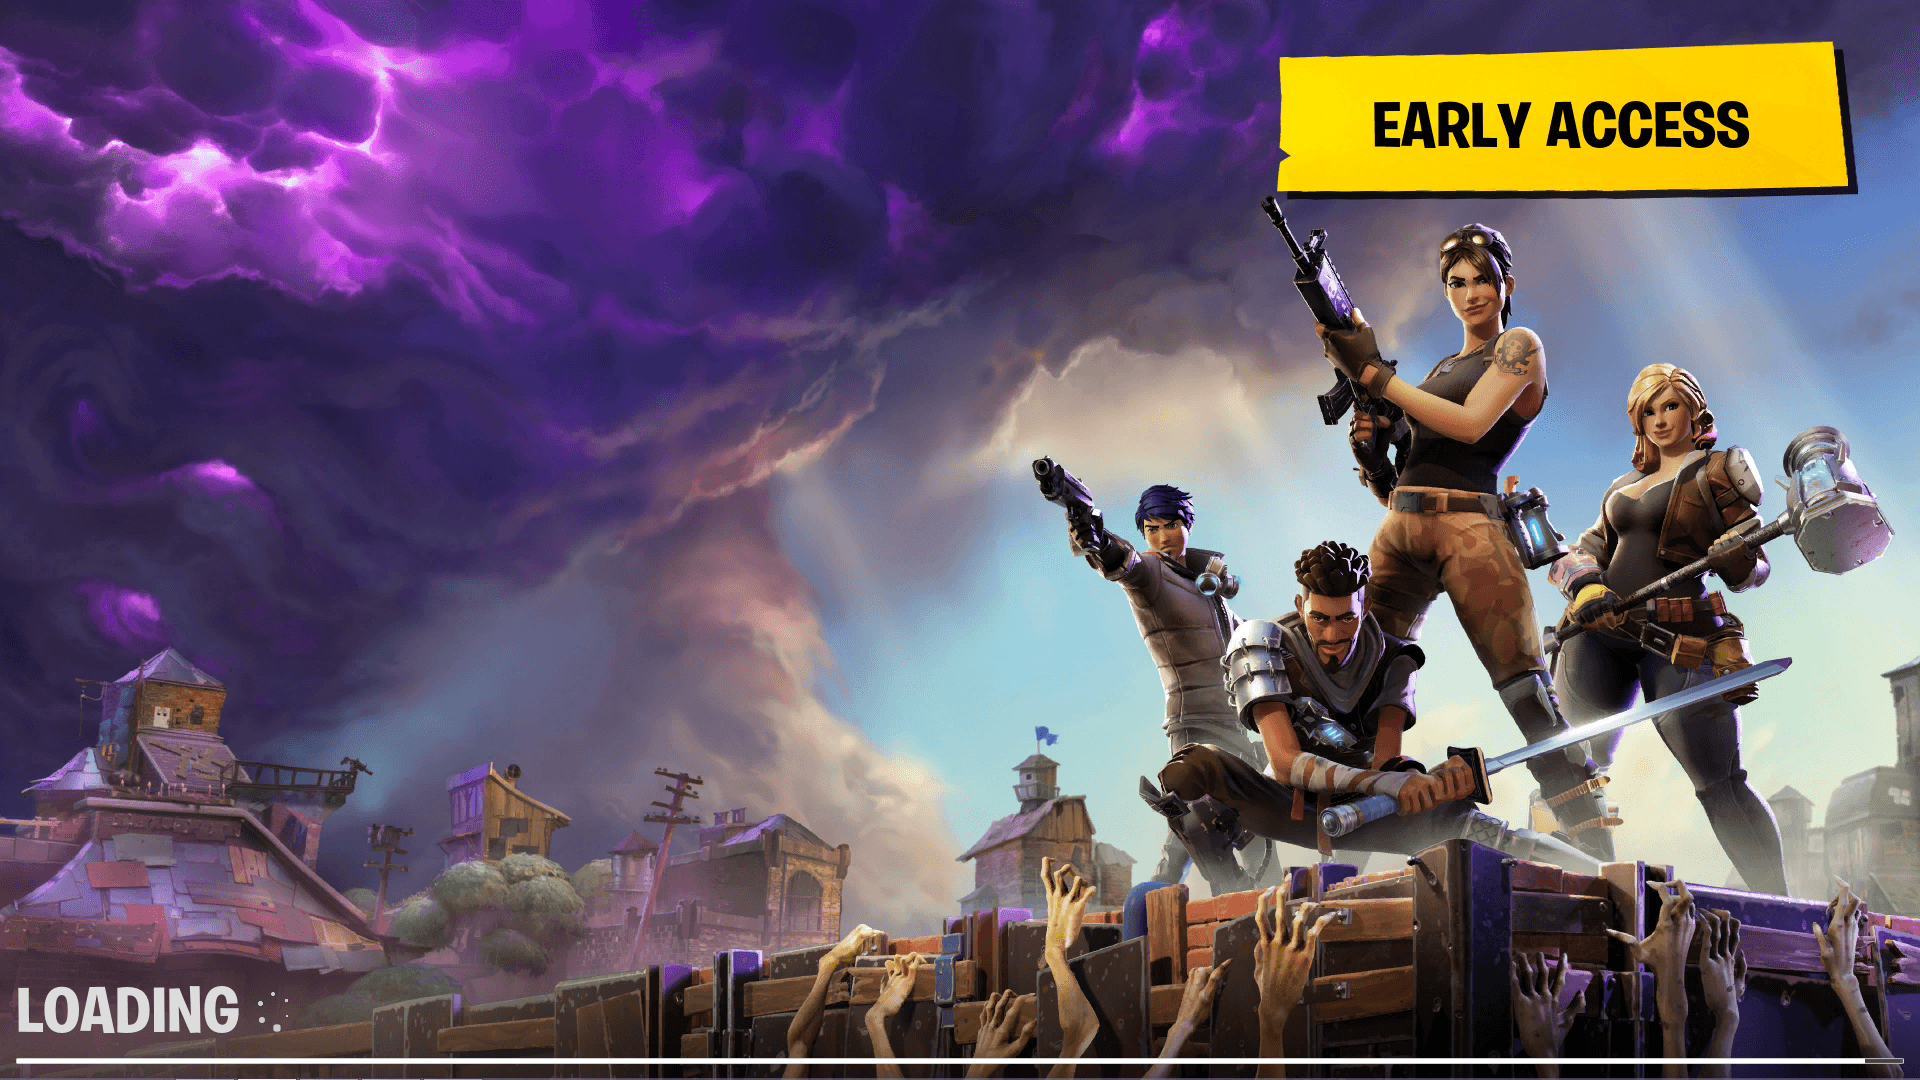 Just installed the game. Can't get past this first loading screen no